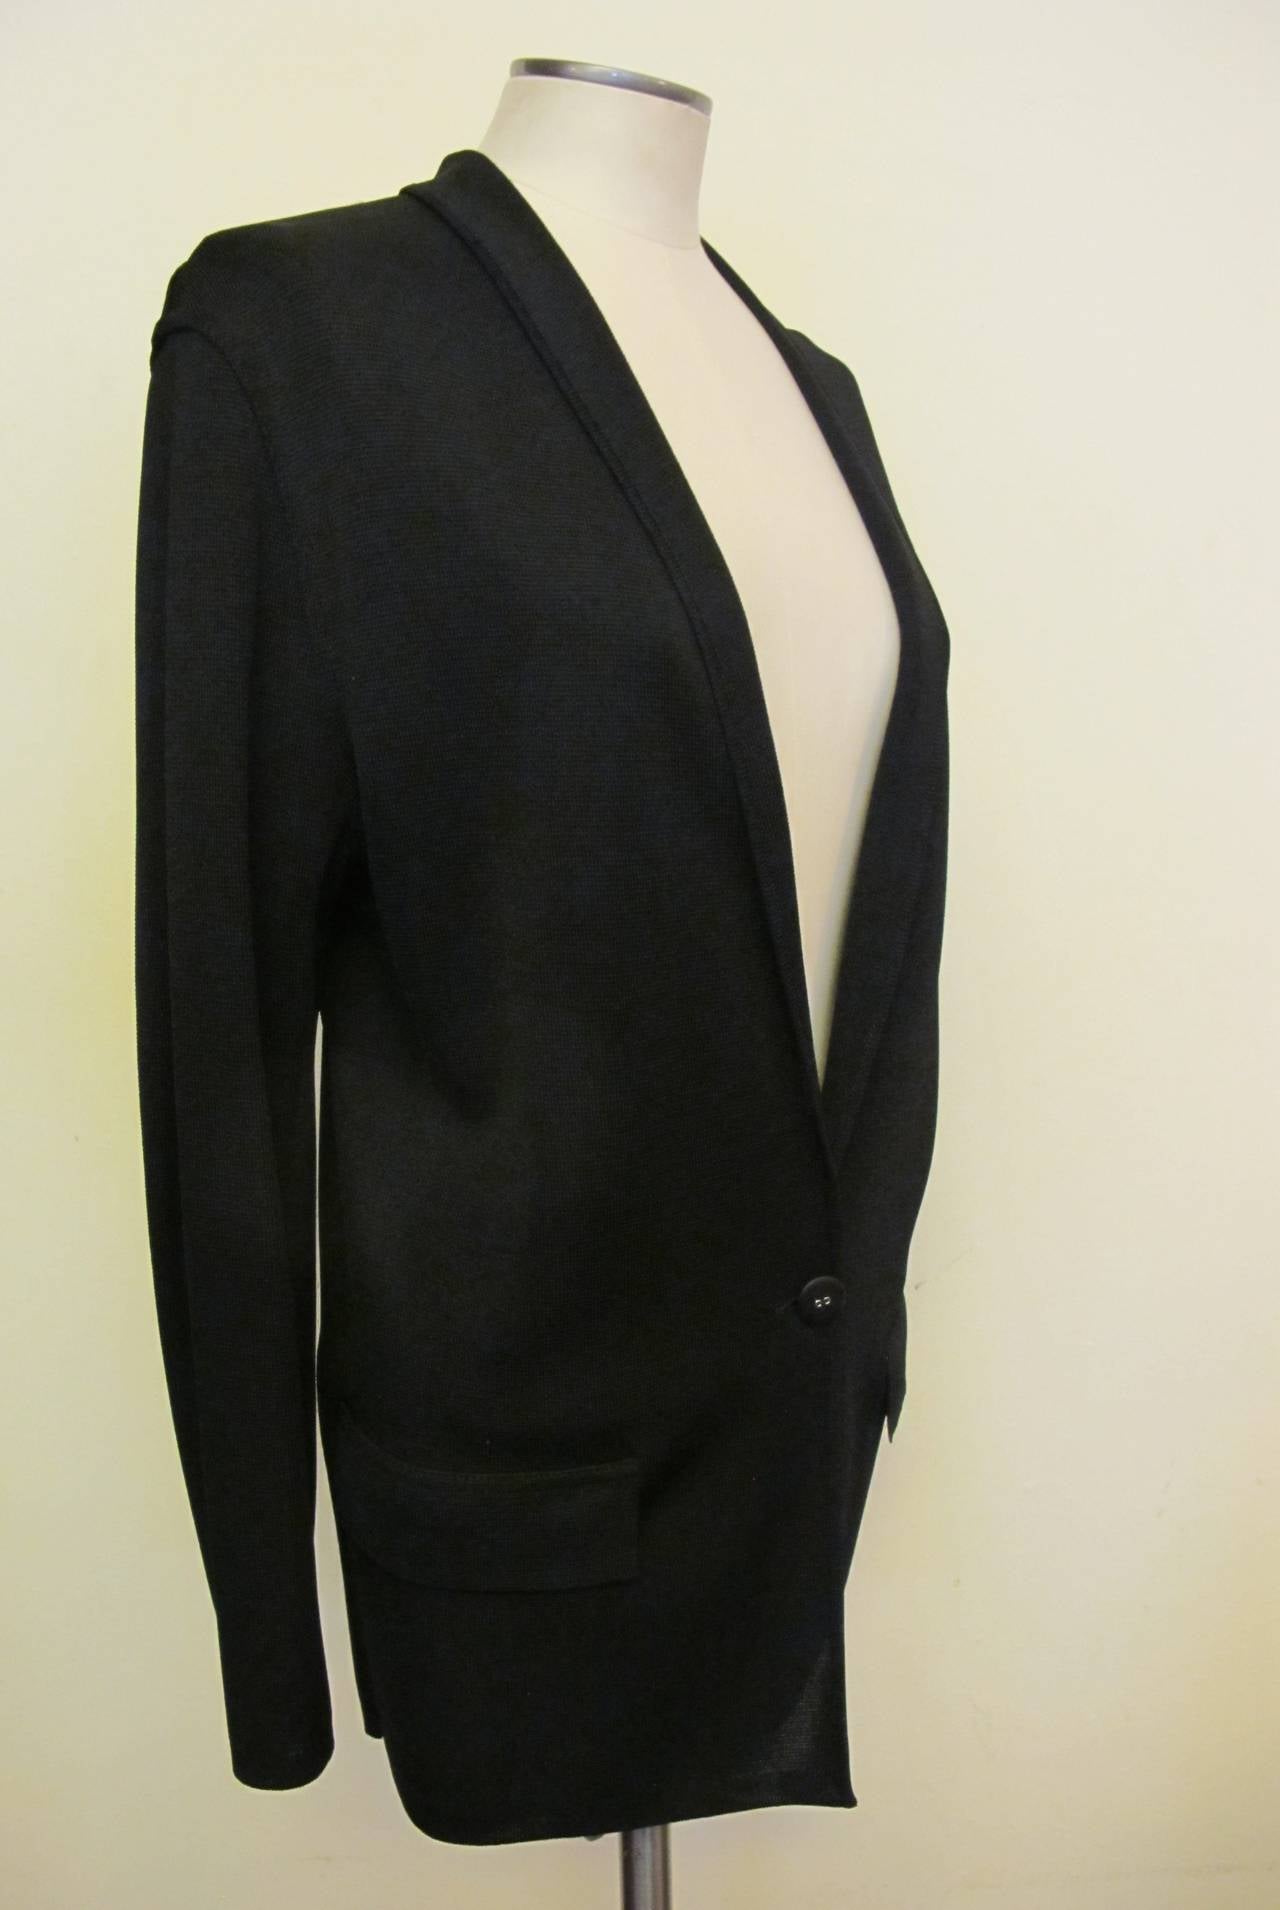 Comfortable, Chic Black Alaia Jacket from the 1980's. It fits perfectly with drop shoulder and hugs the body. Words cannot describe the beauty of this simple jacket. Sleeve length measures 22.5 inches. Shoulder to shoulder measures 17 inches.